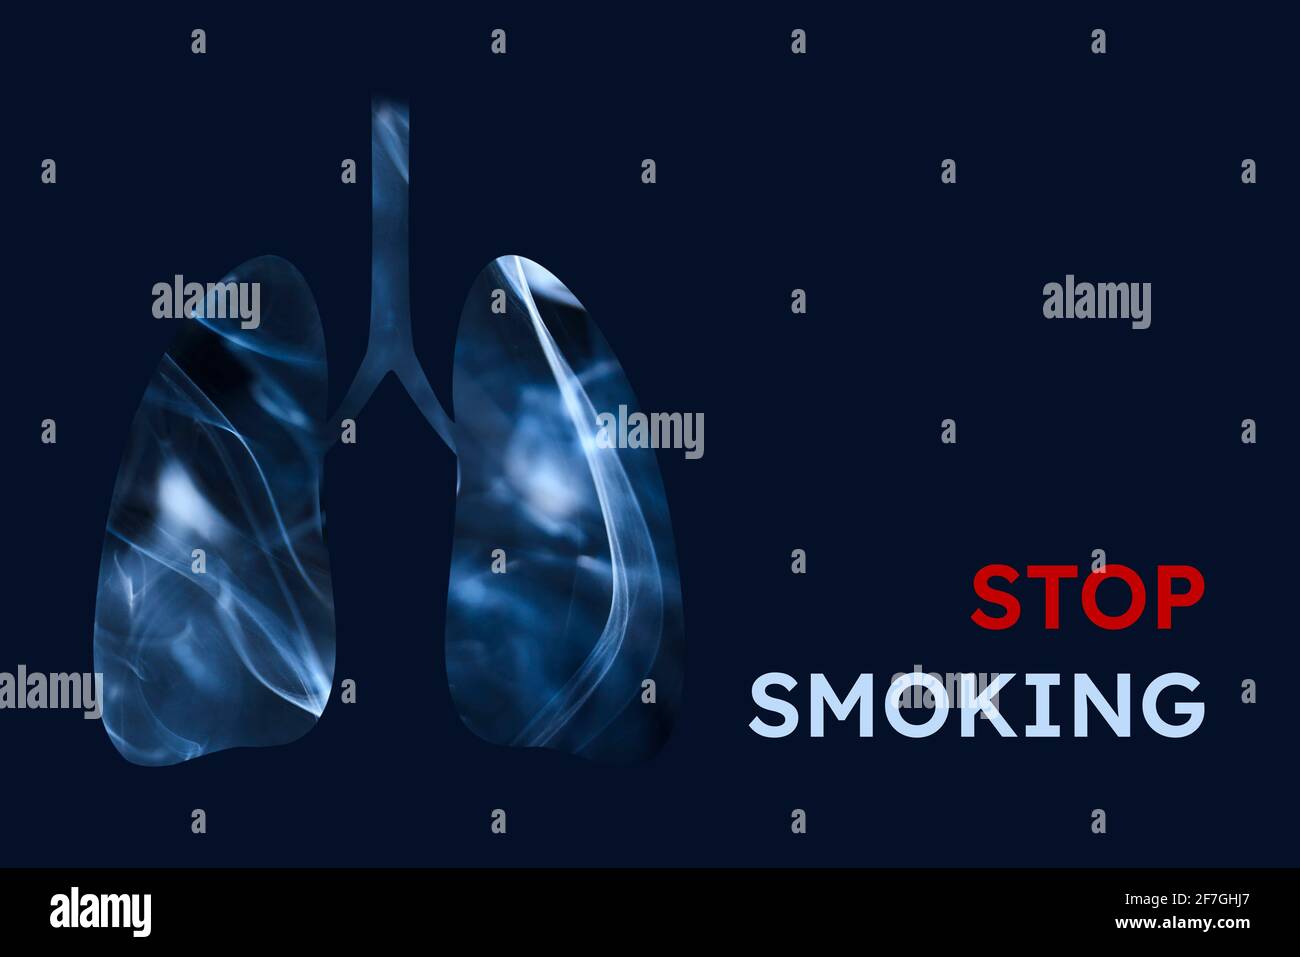 Smoker lungs, full of smoke. Horizontal image with dark blue background and text Stop Smoking. Concepts of World No Tobacco Day, quitting smoking and Stock Photo